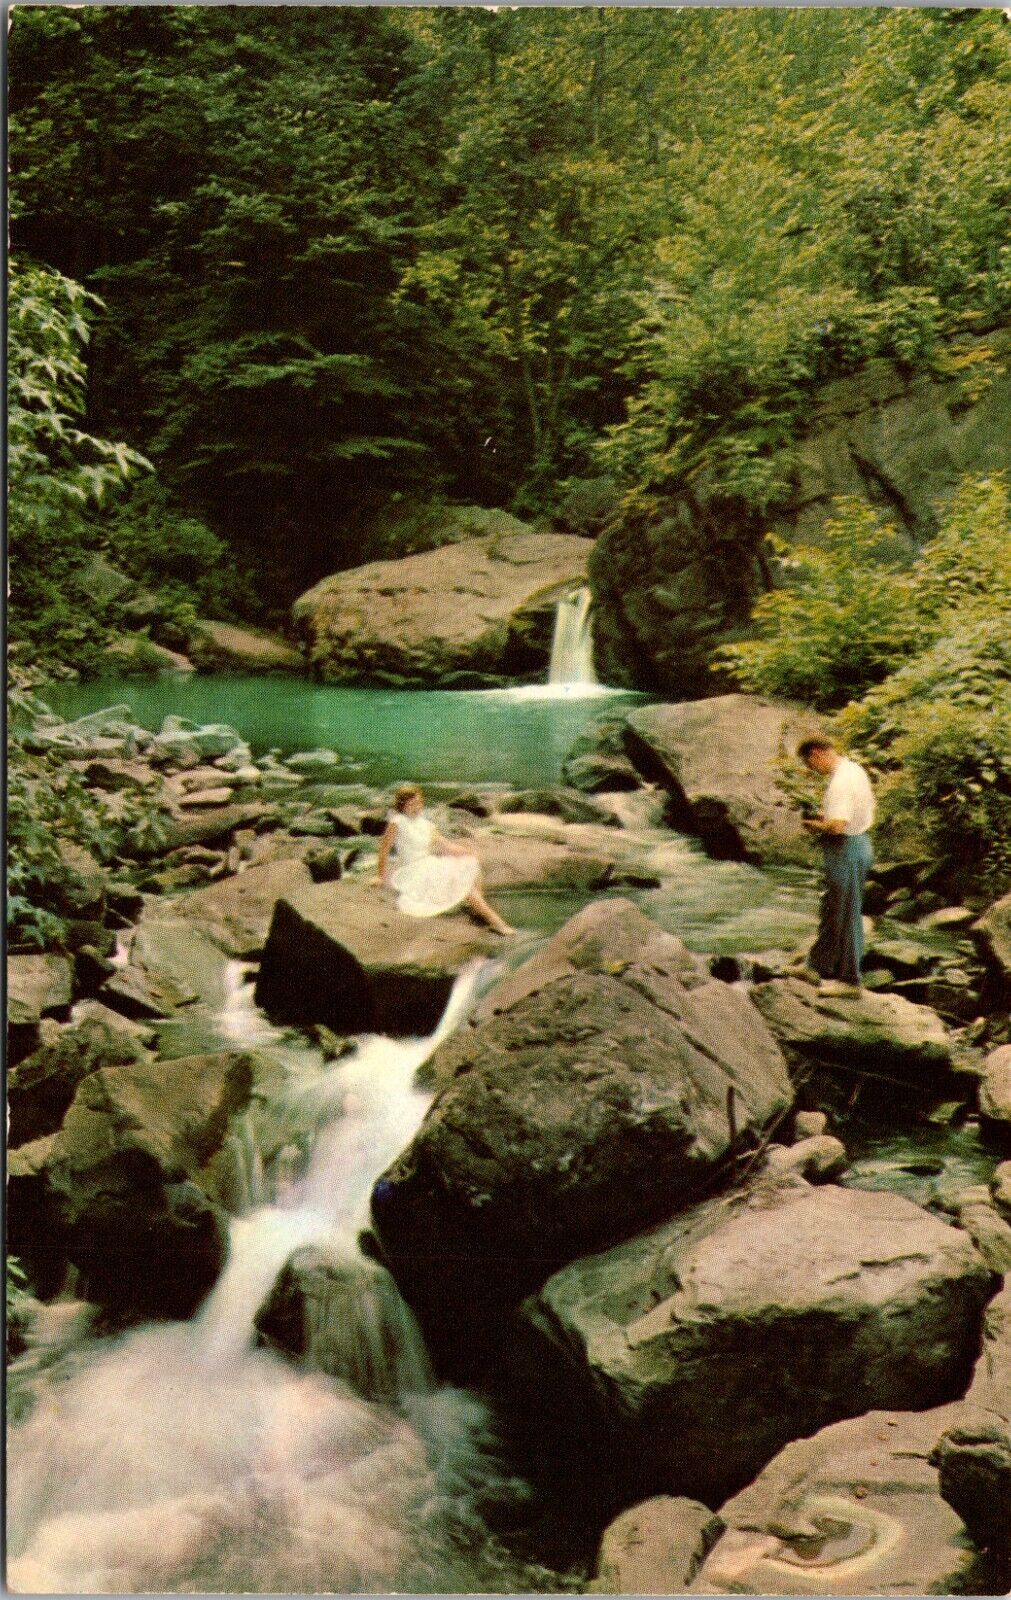 Couple taking photos at Beautiful mountain stream in WEST VIRGINIA POSTCARD D7